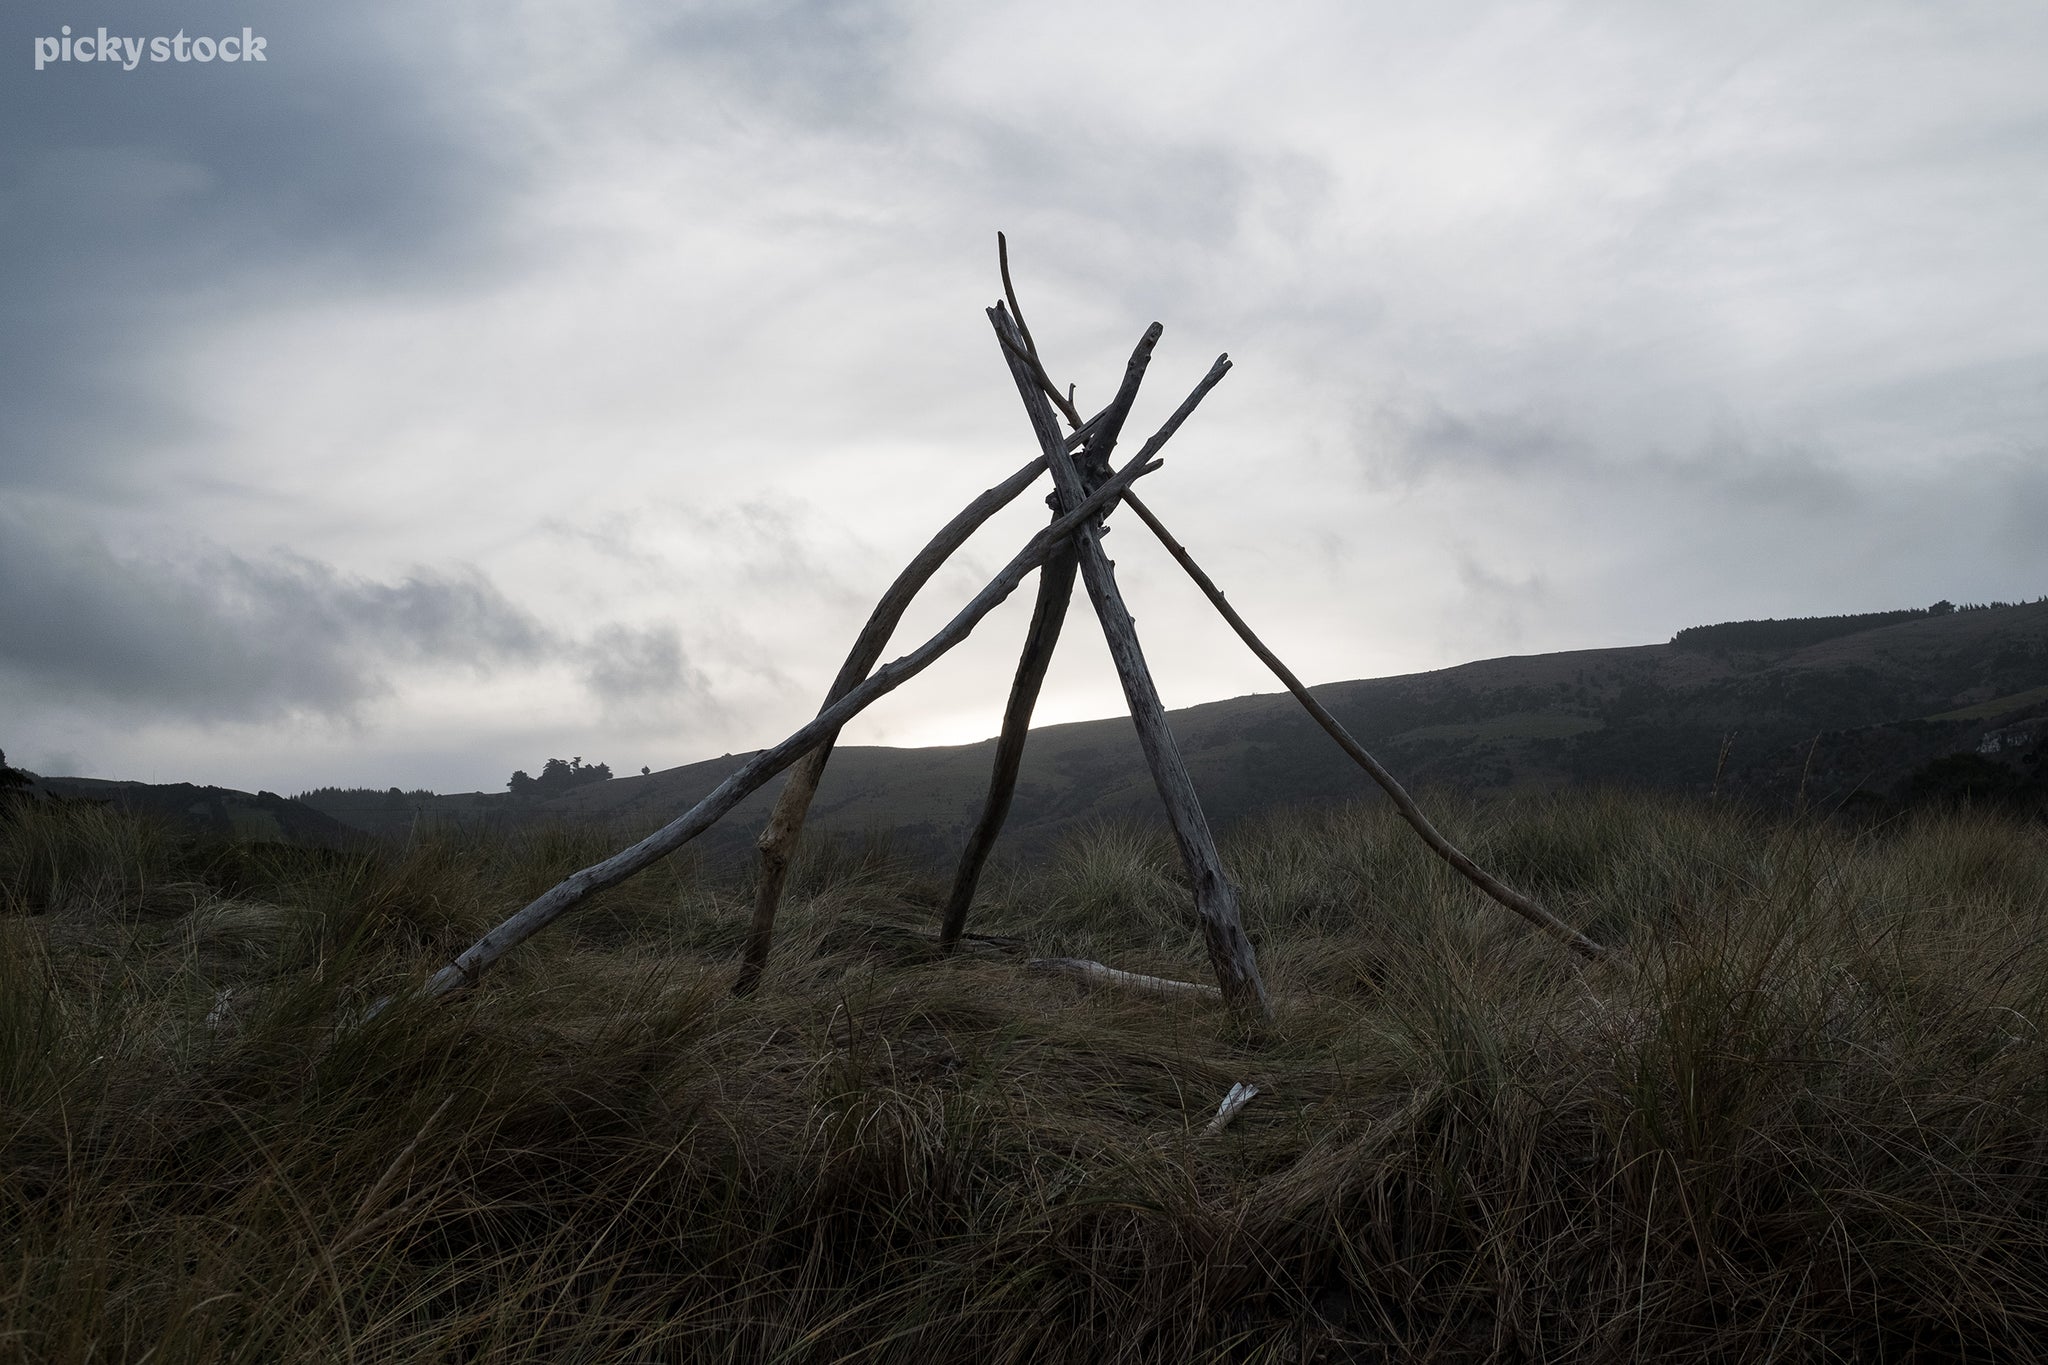 Landscape closeup of a free-standing structure amongst a field of dark green grass, wild and untamed. The dried wood leans into the center overlapping one another weaving to form a crude shelter or start of a large fire.